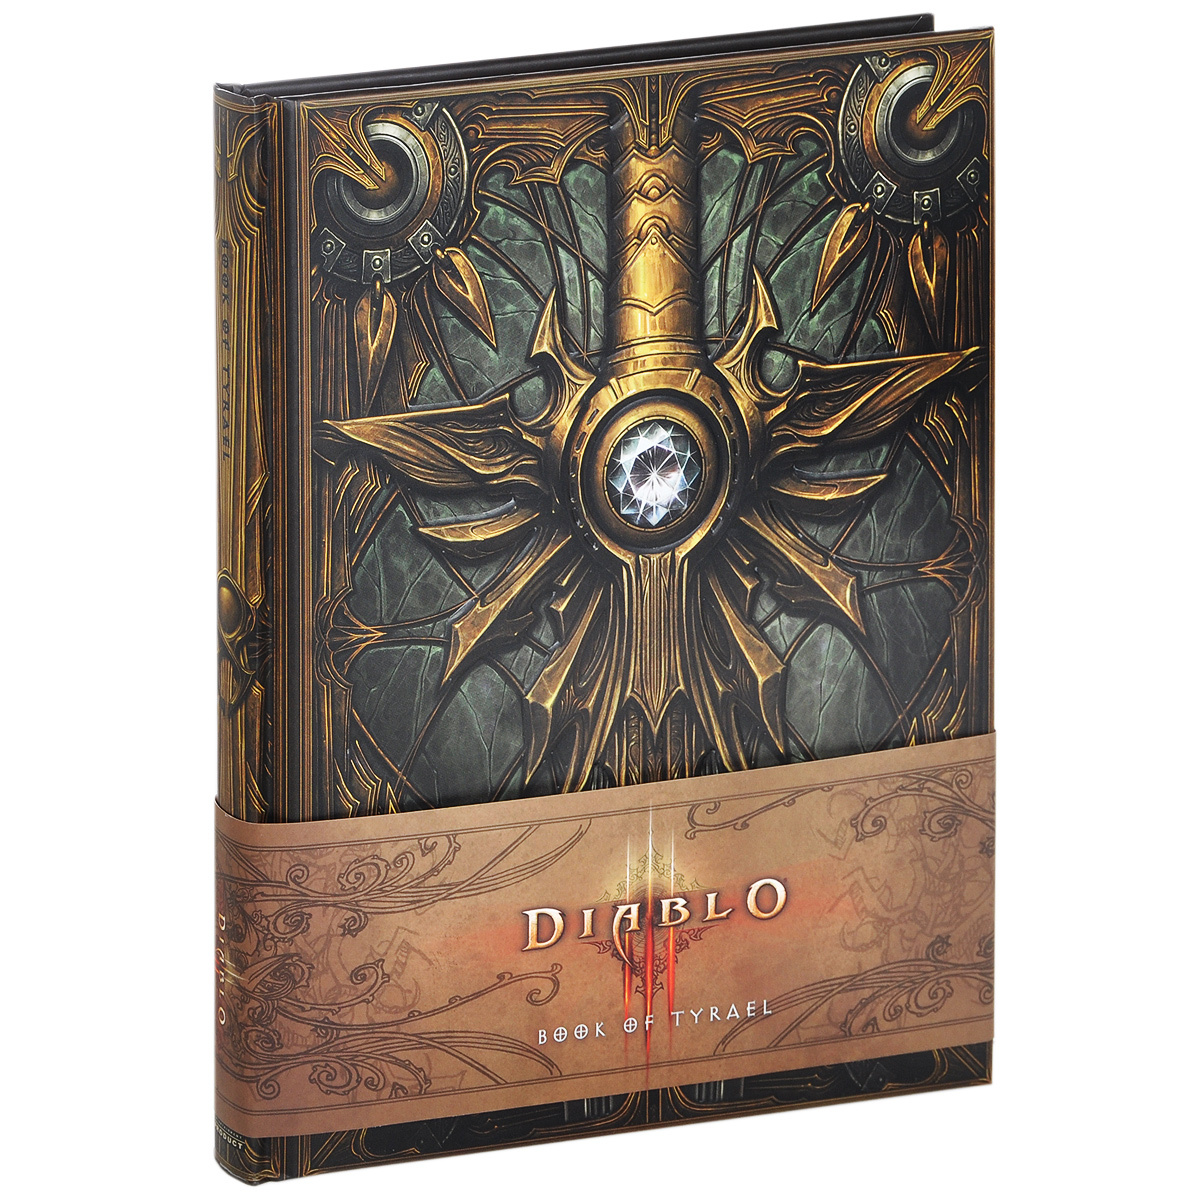 97 Best Seller Diablo Iii Book Of Tyrael from Famous authors